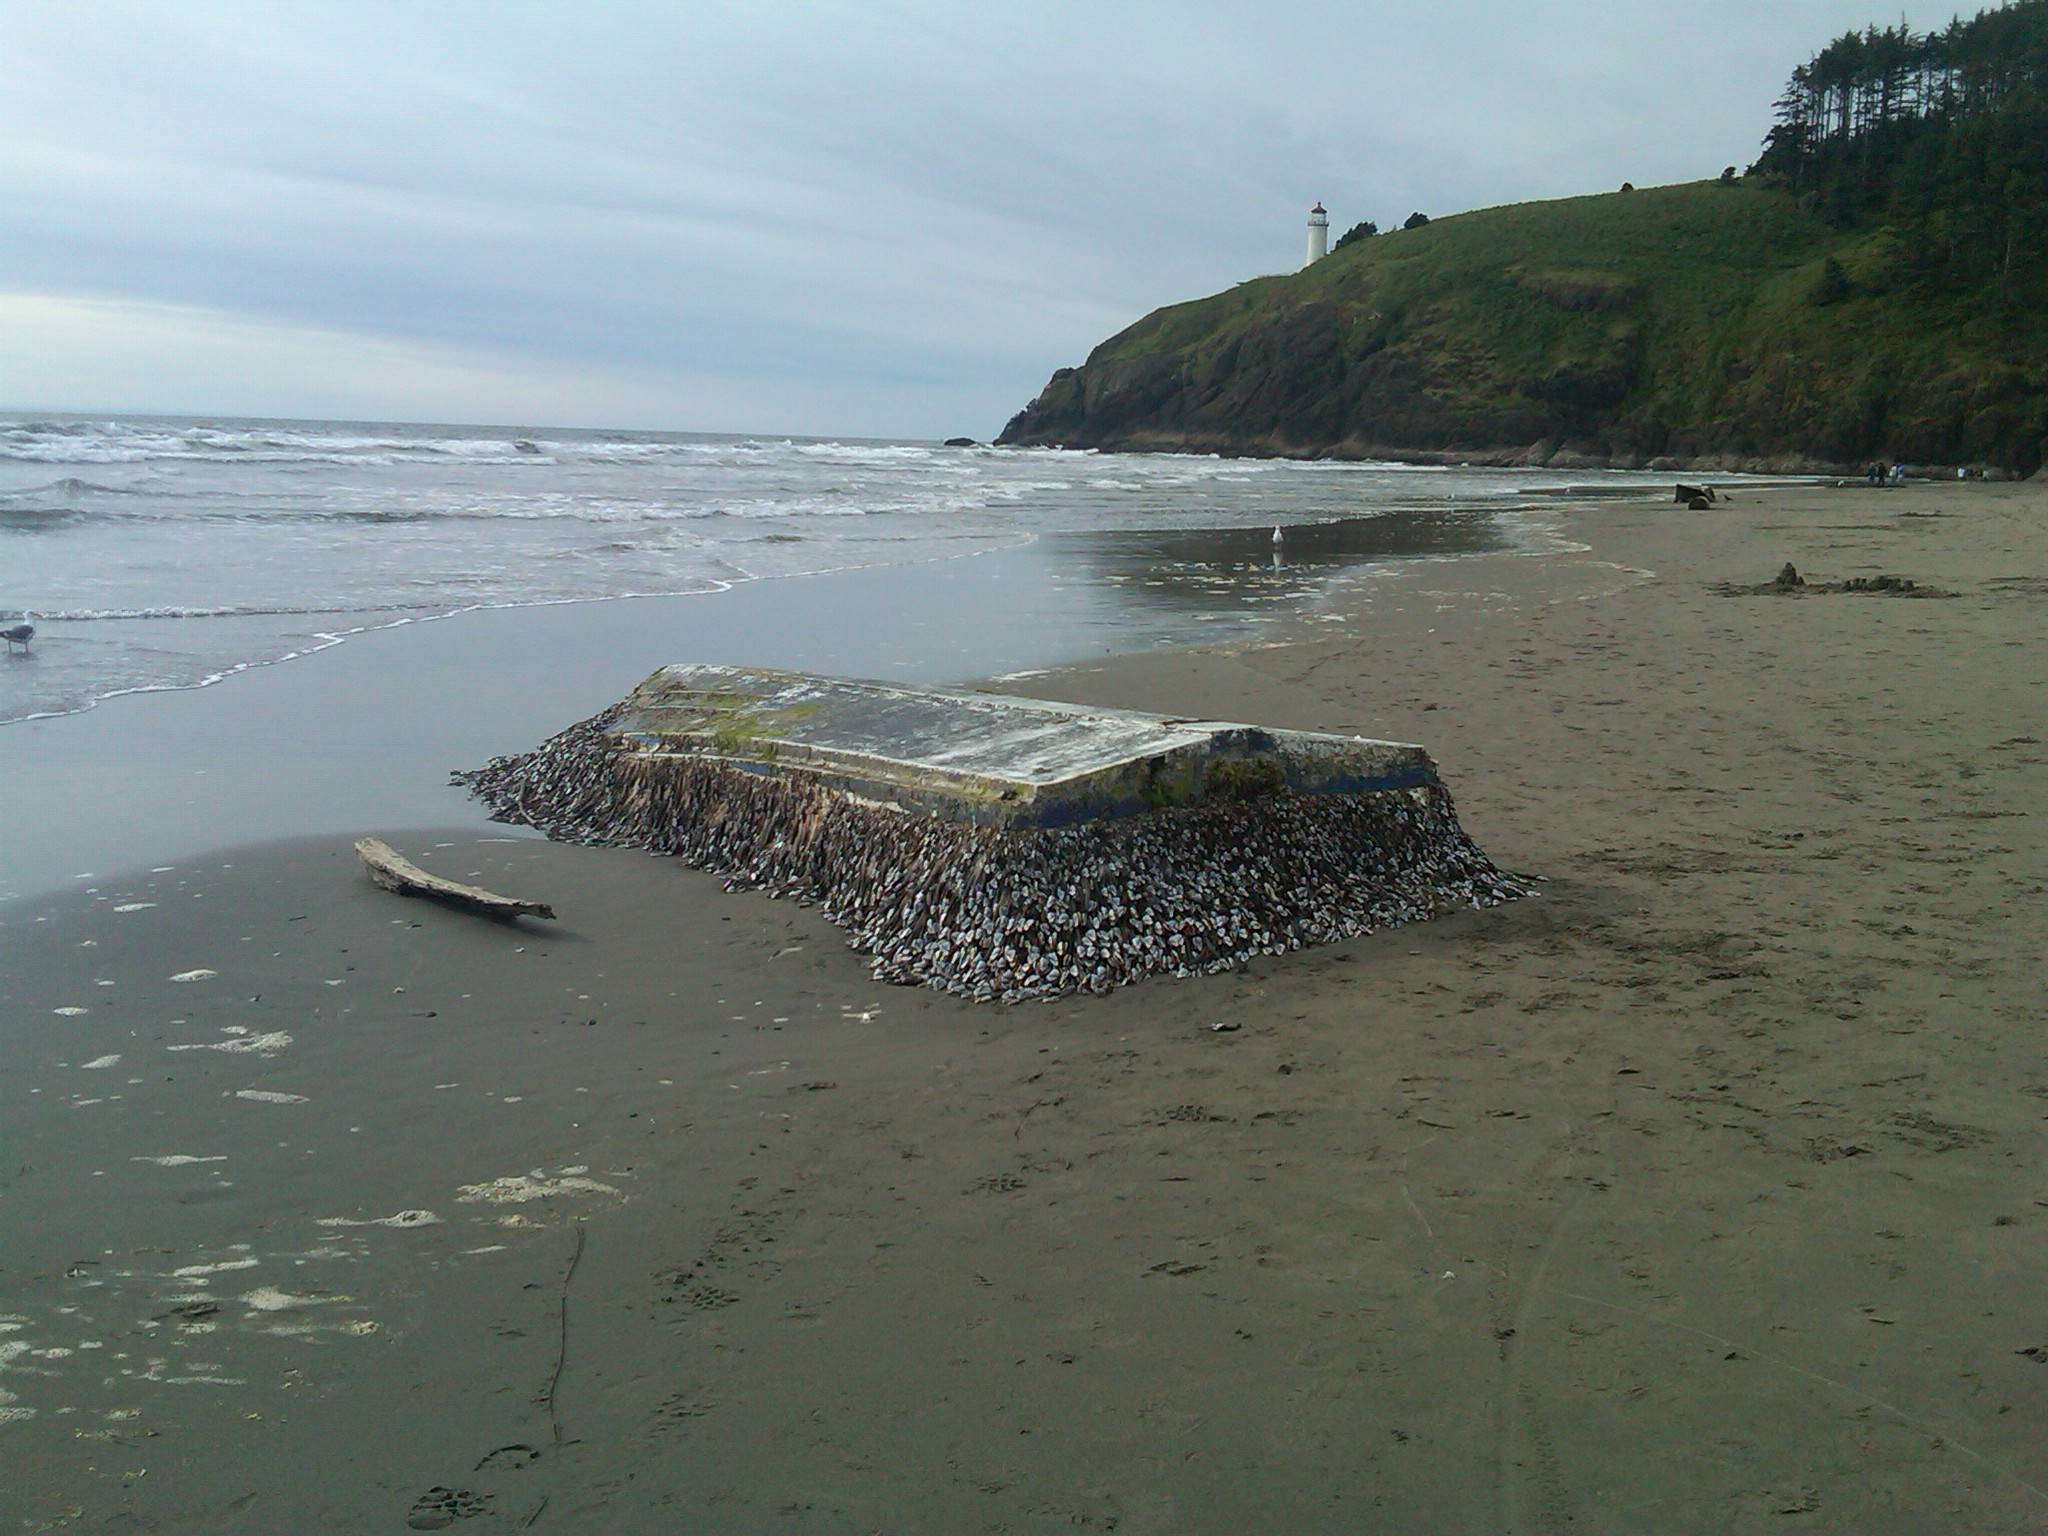 A small, overturned boat on a beach, covered with barnacles. 